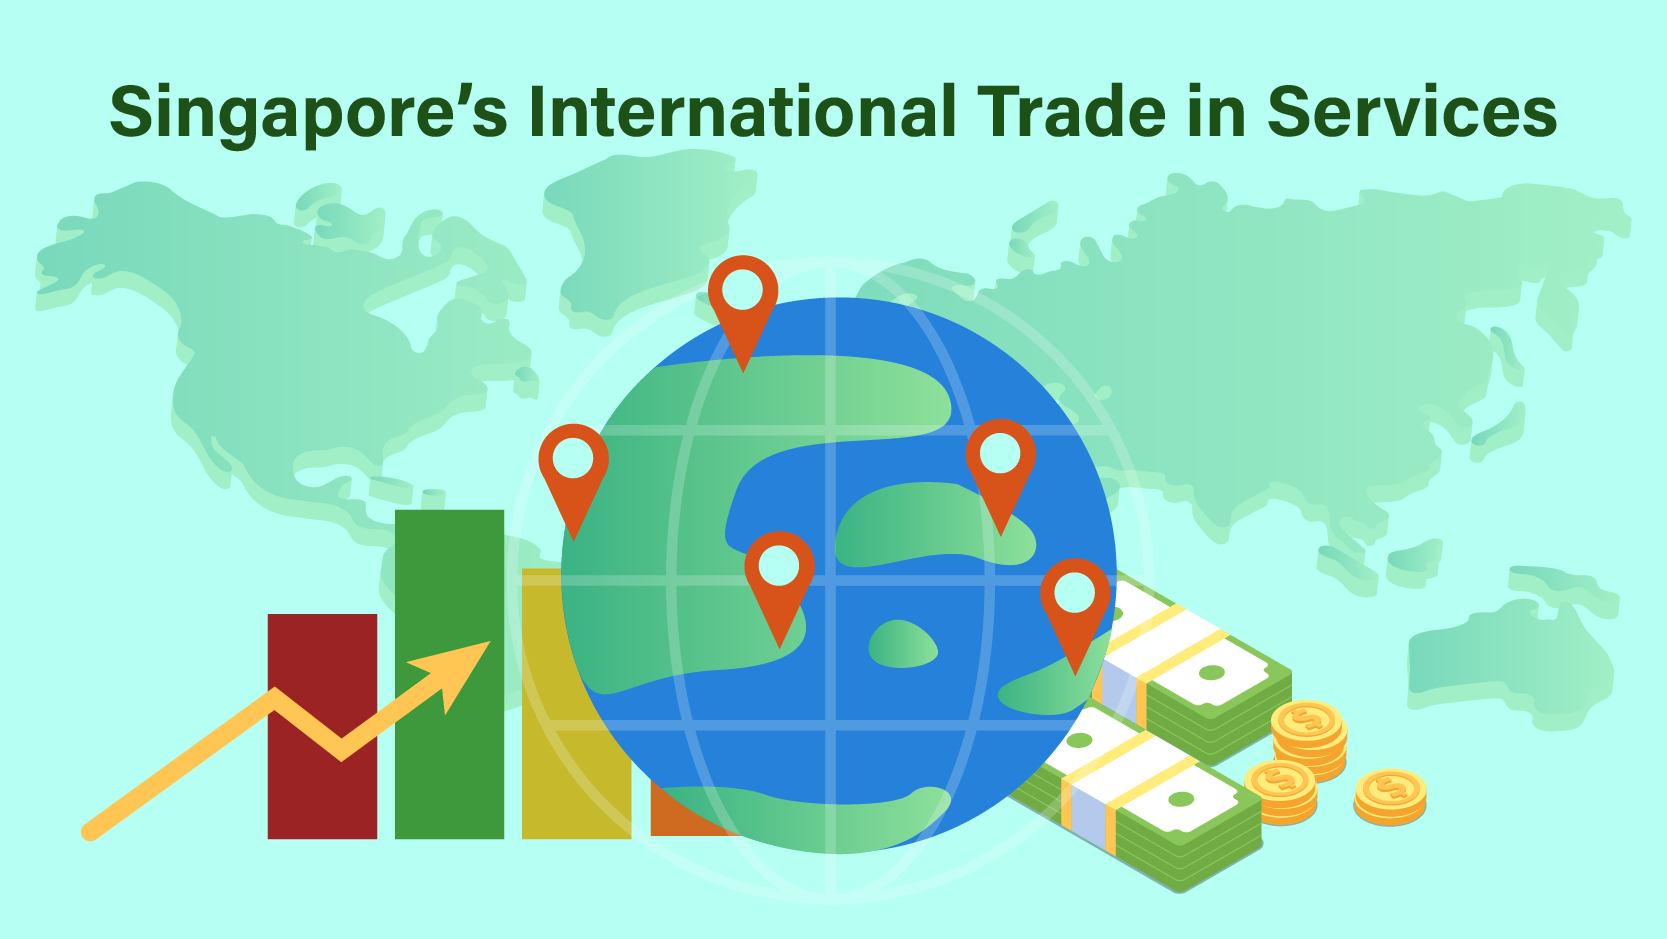 Singapore's International Trade in Services